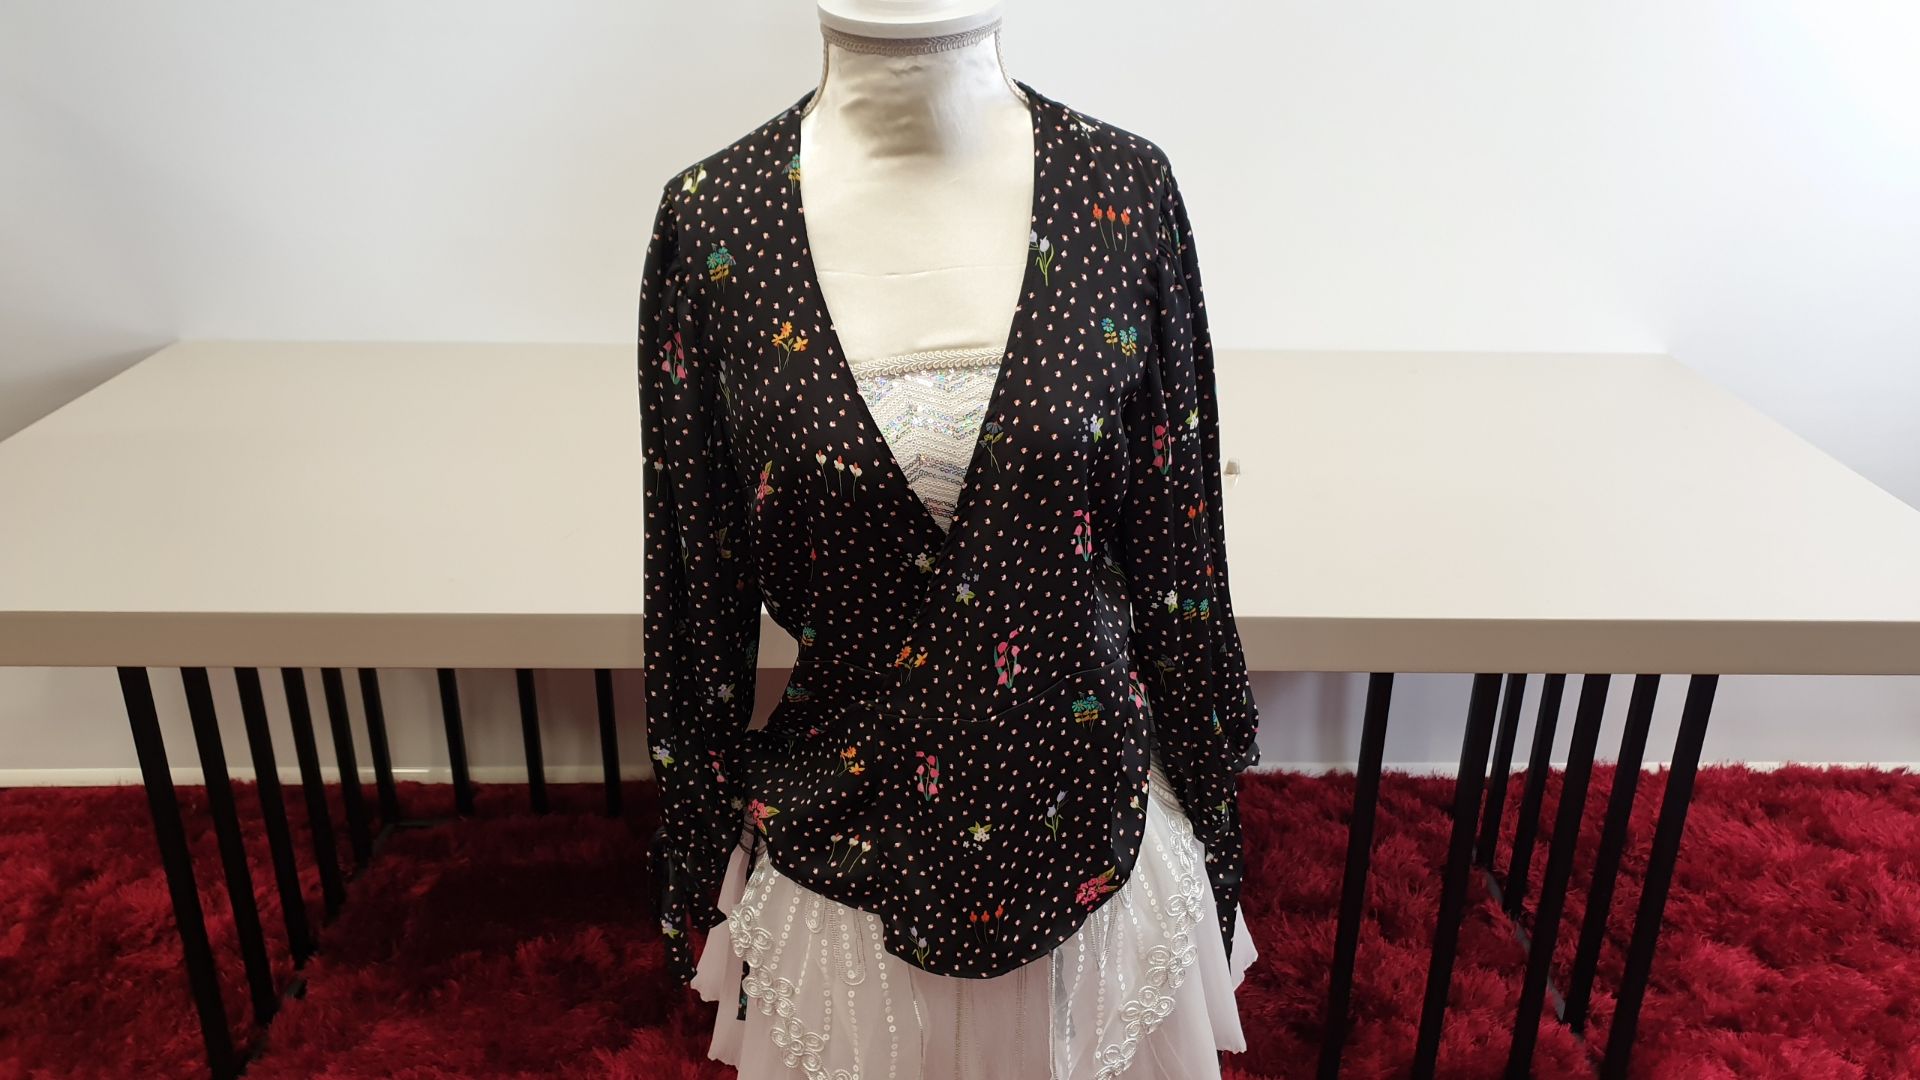 20 X BRAND NEW TOPSHOP (EXCLUSIVE COLLECTION) BLACK BLOUSE WITH FLORAL DETAIL IN VARIOUS SIZES